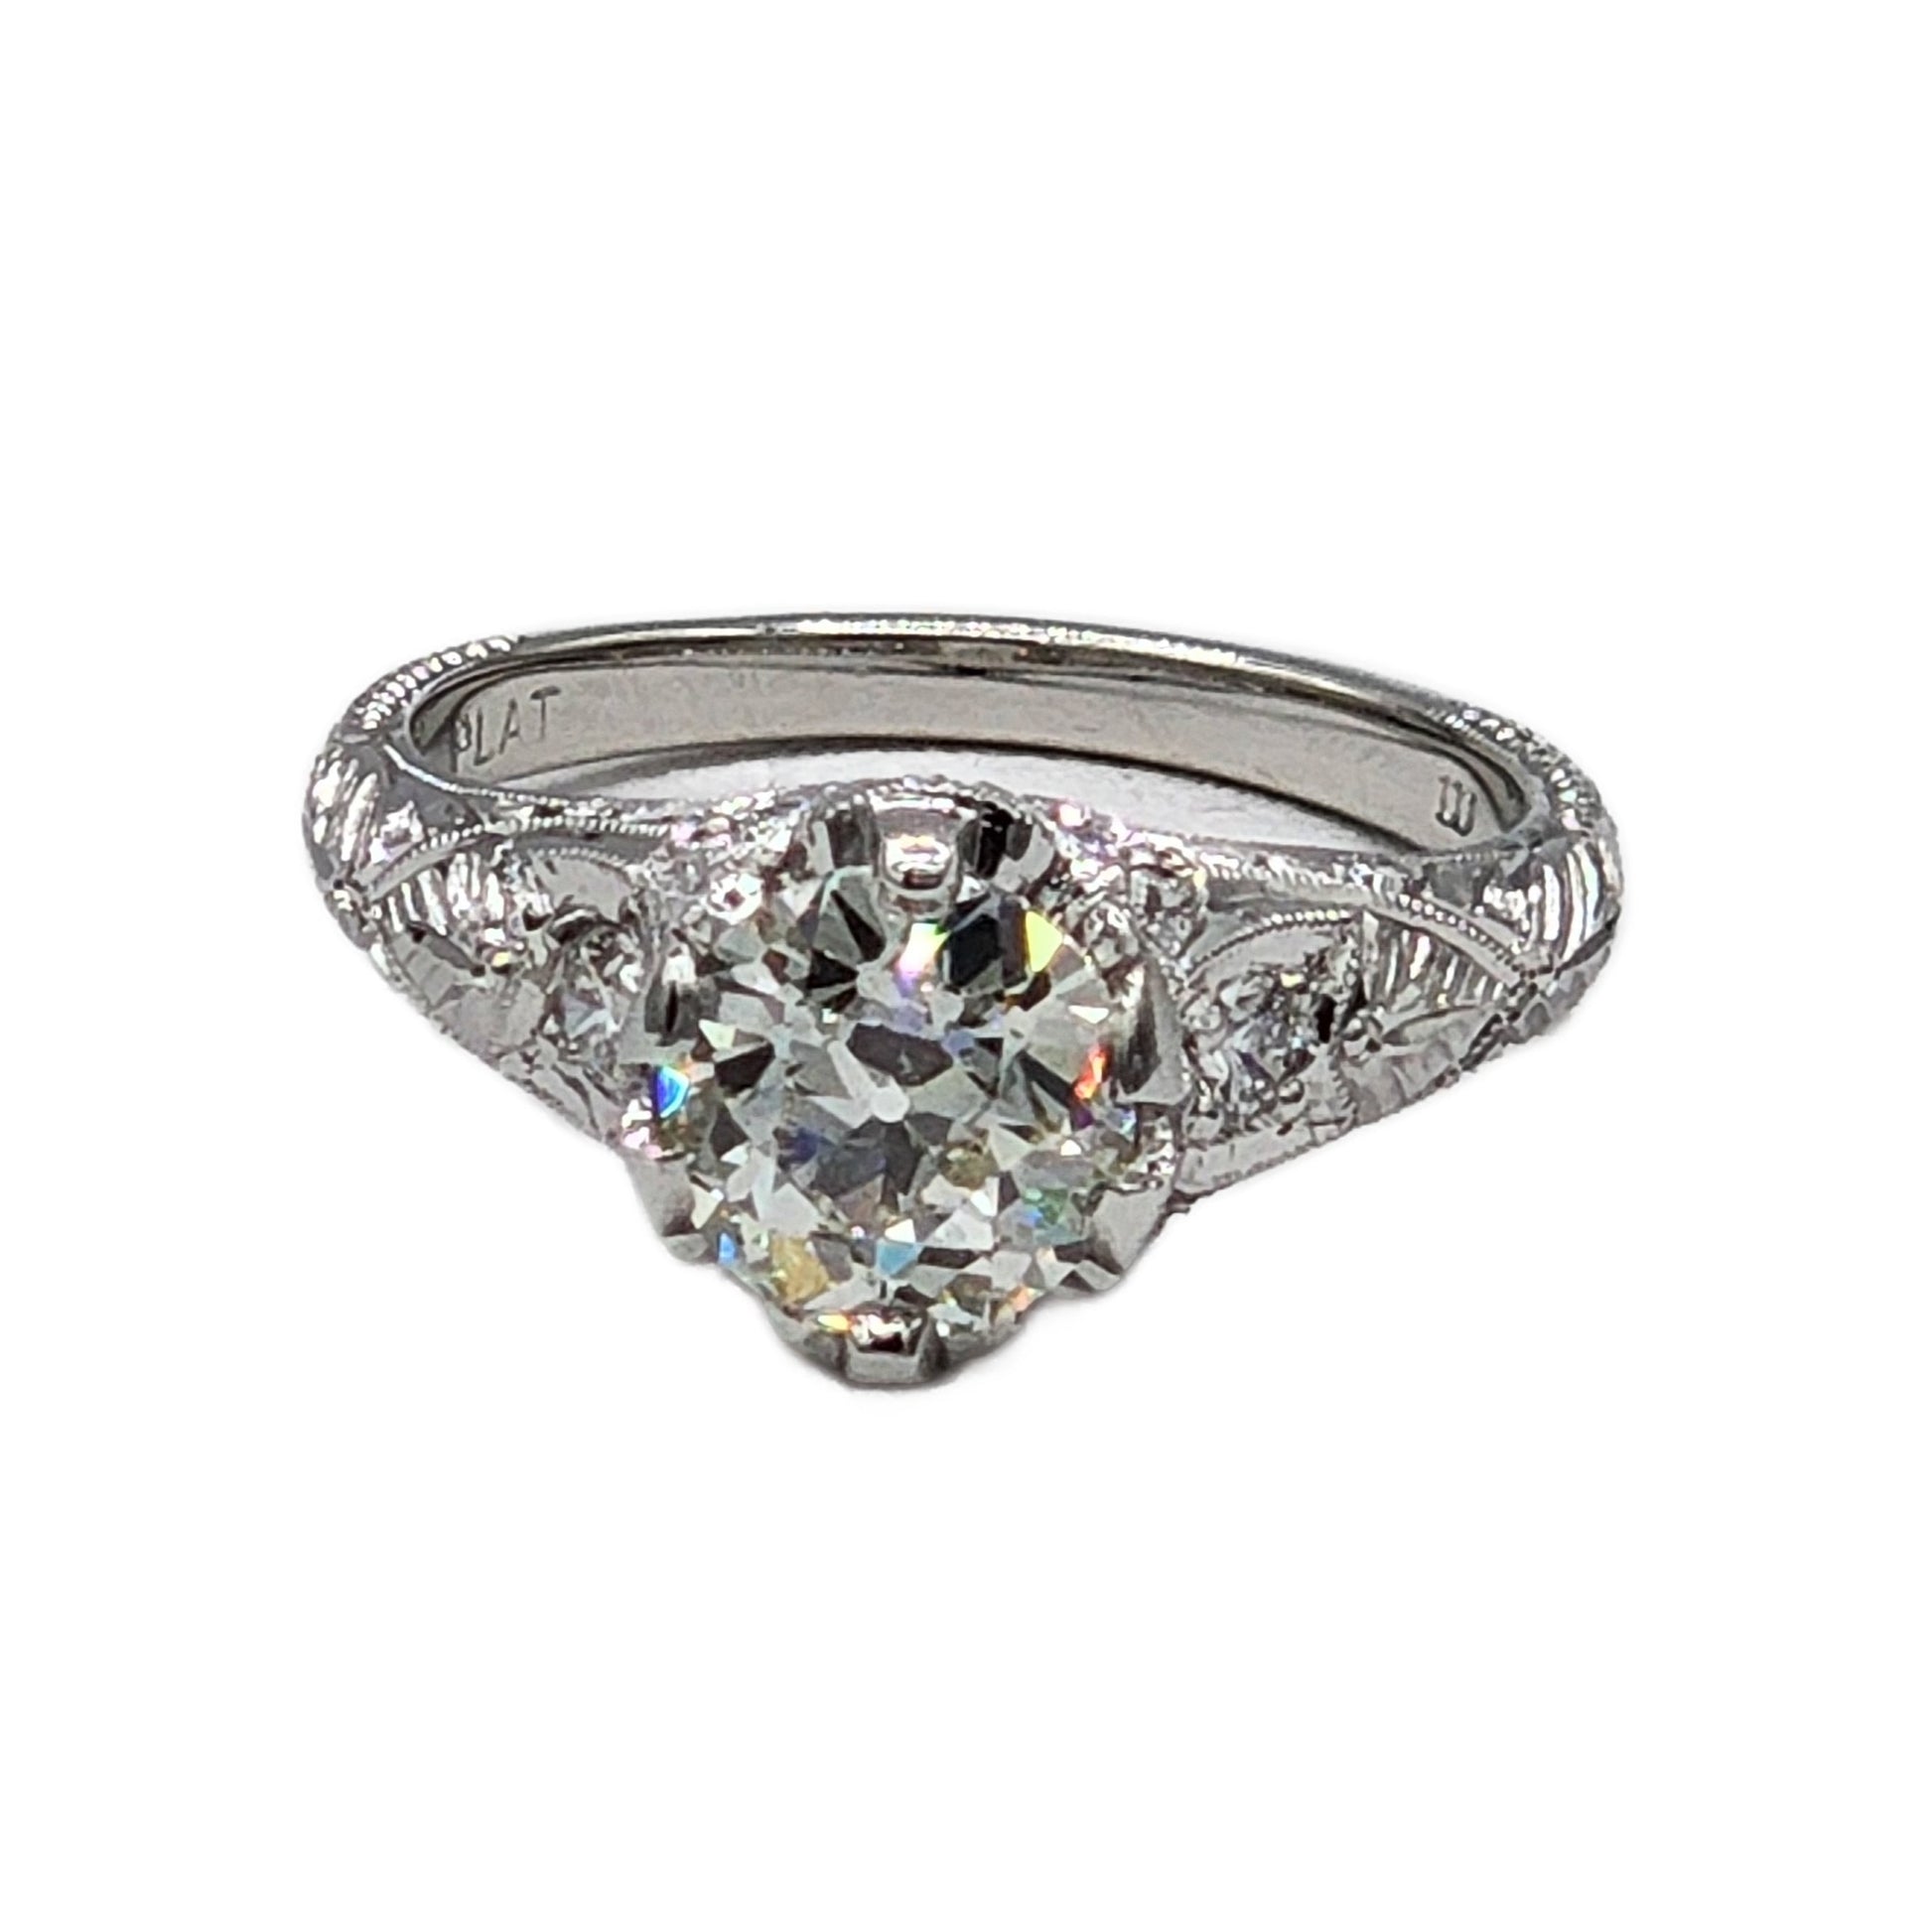 1.54 Carat European Cut Diamond Ring By Whitehouse Brothers